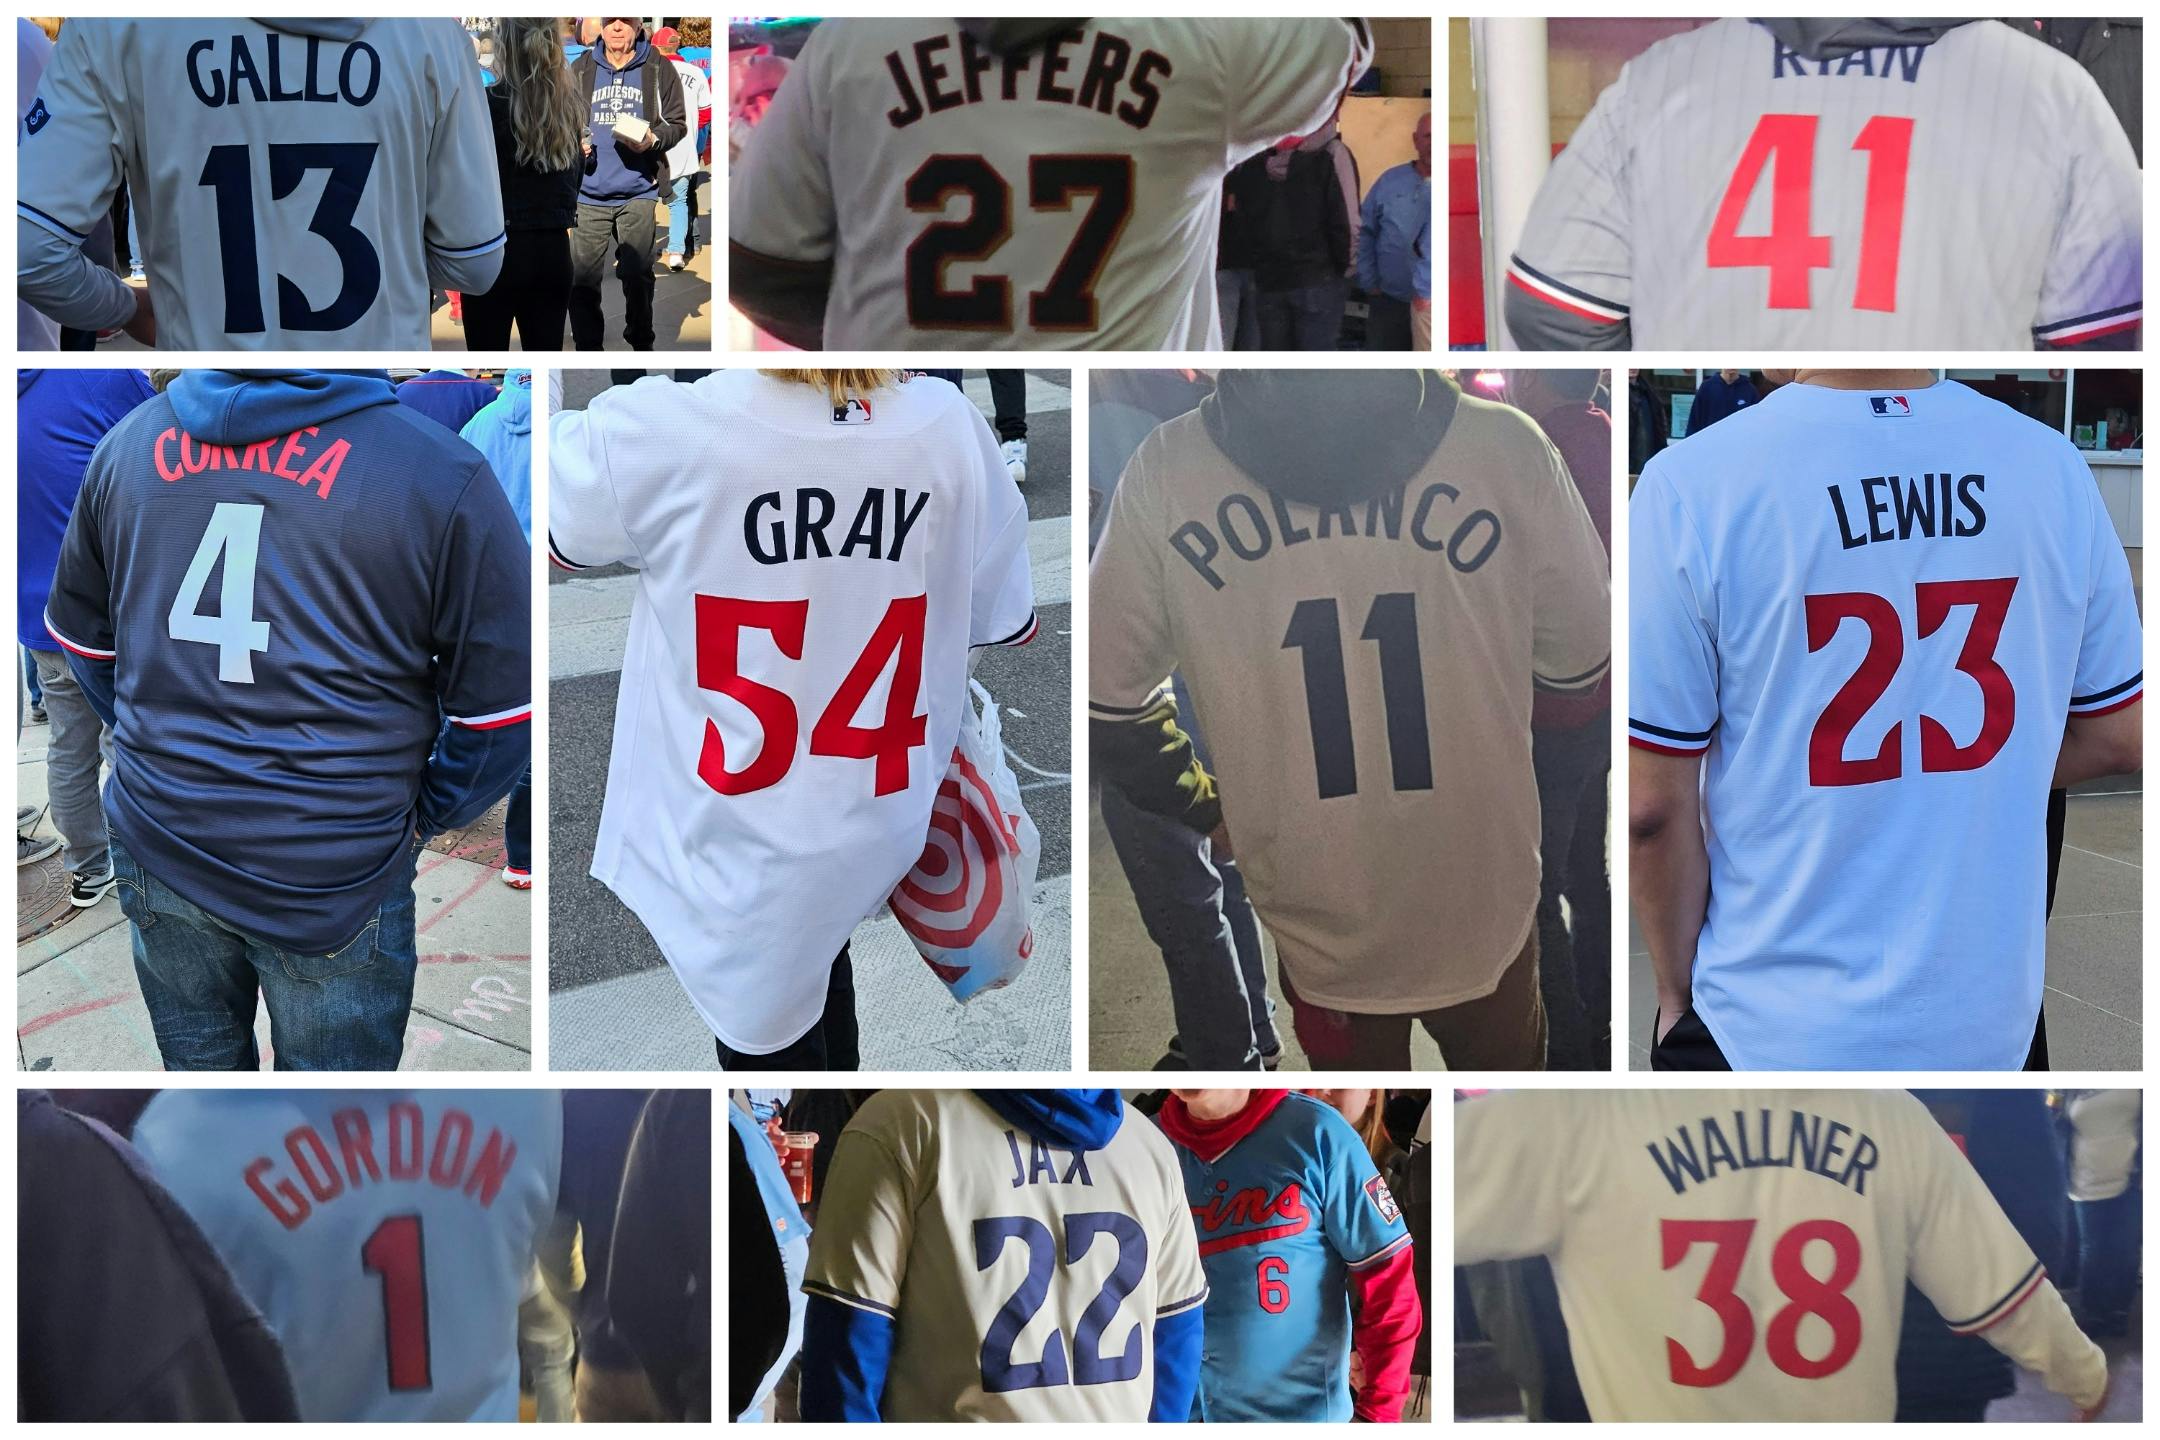 What are the top Twins jerseys of all time?